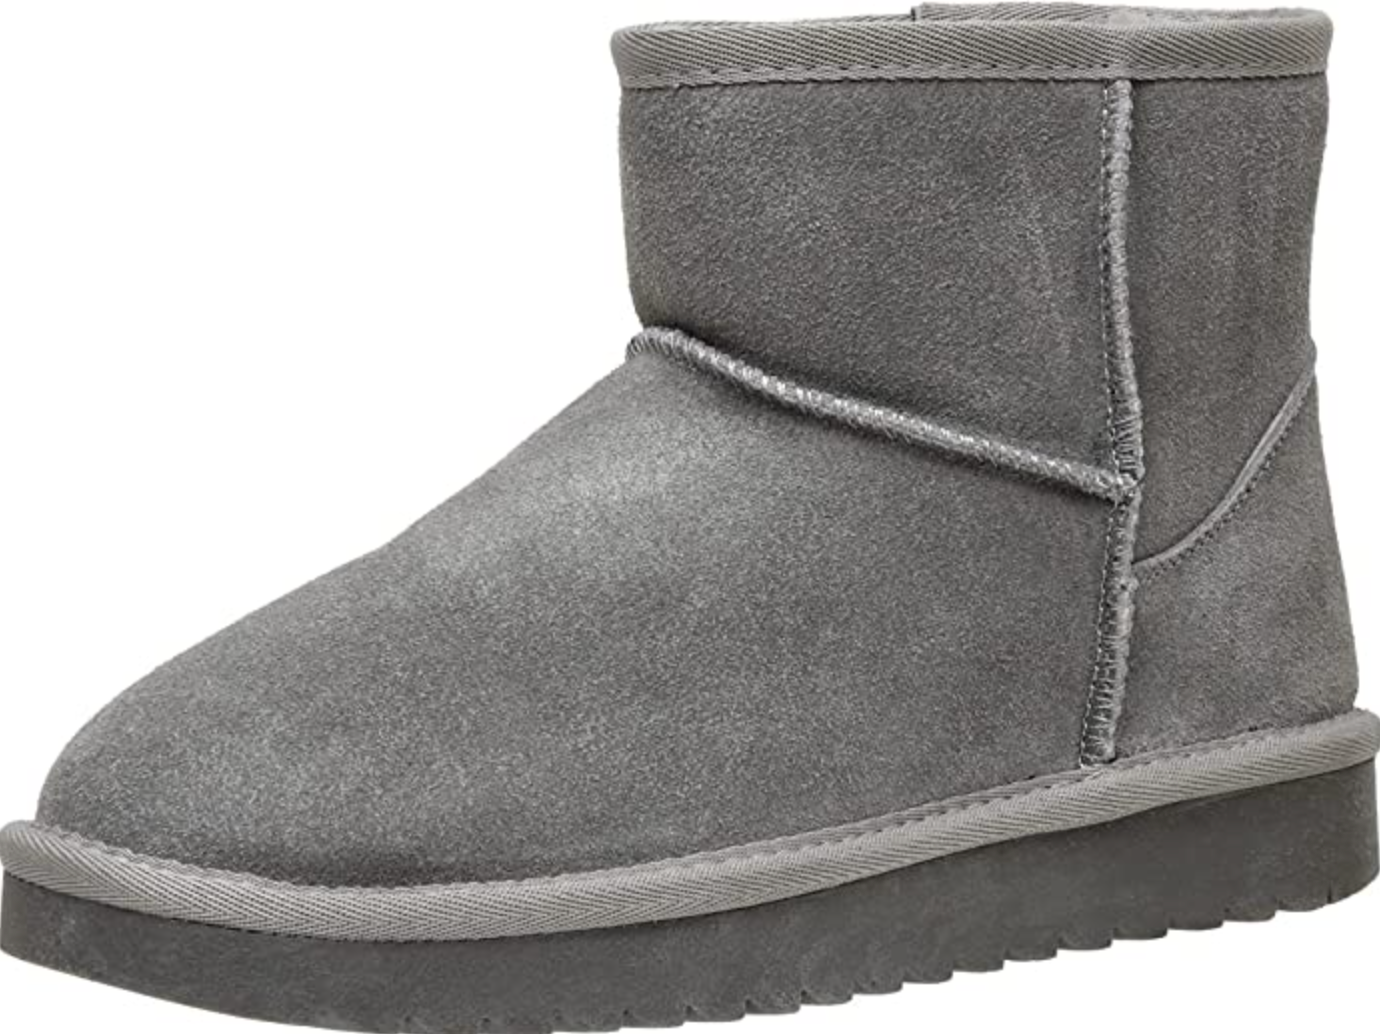 Cushionaire Women's Hipster Pull On boot